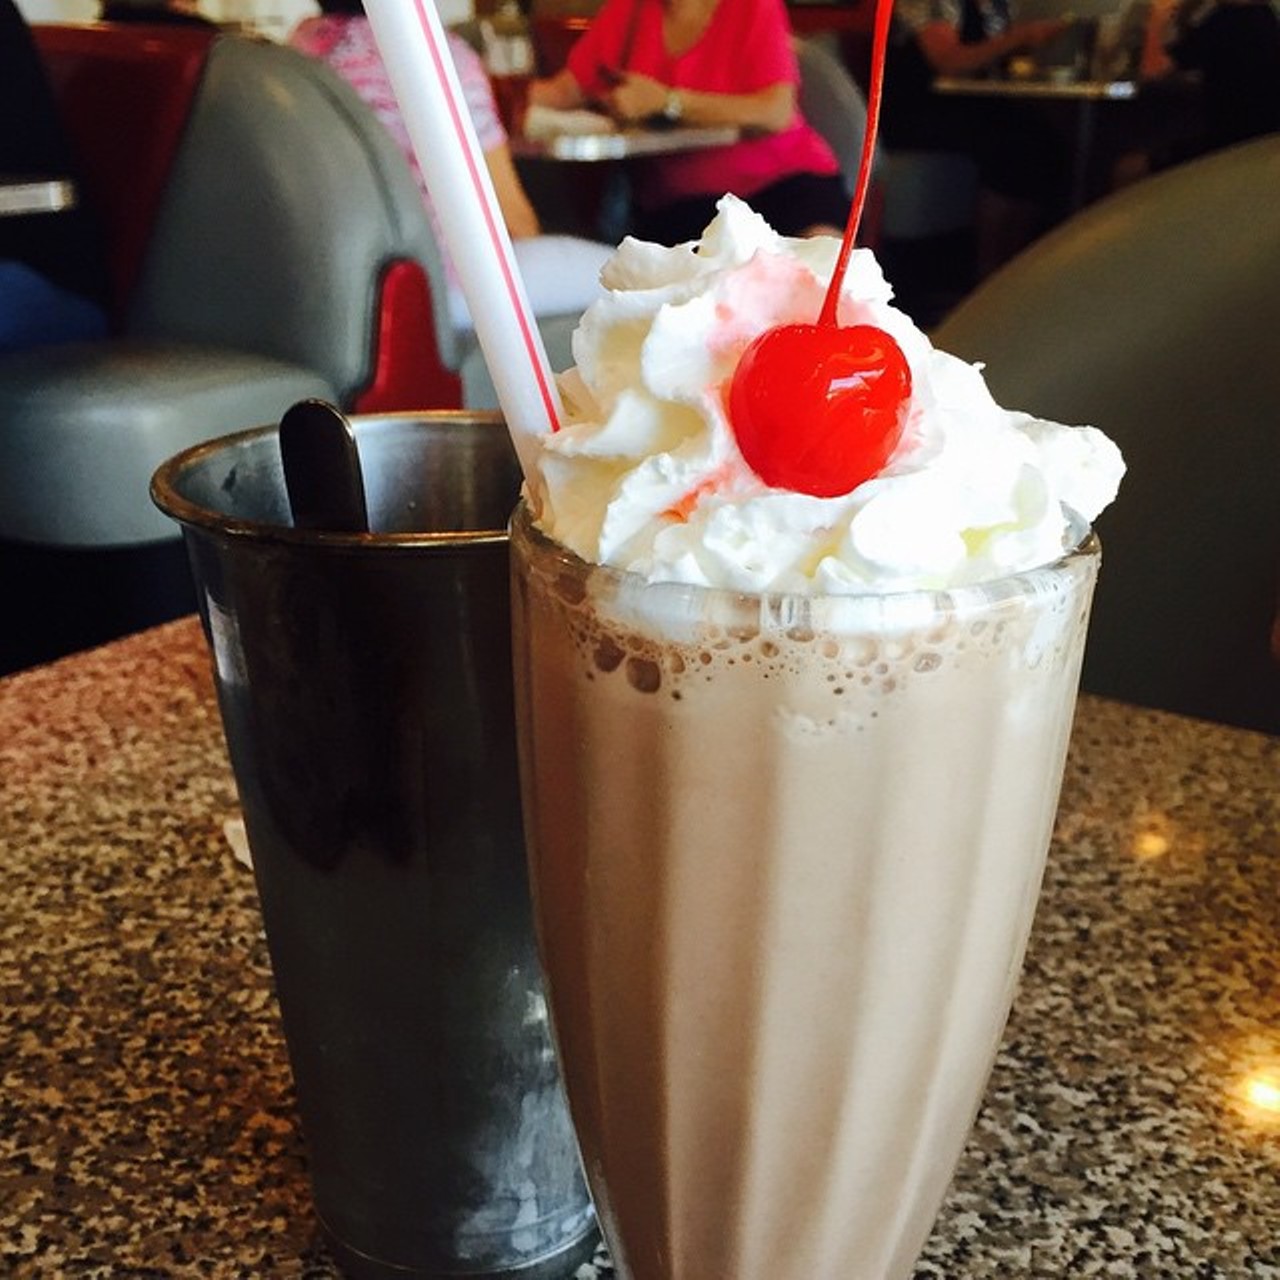 Split a milkshake at 5 & Diner
13001 Founders Square Drive, Orlando, 407-757-0978
Splitting a milkshake is classic date stuff, and 5 & Diner has some pretty great ones. They&#146;re around $5 each. 
Photo via jenntebb/Instagram